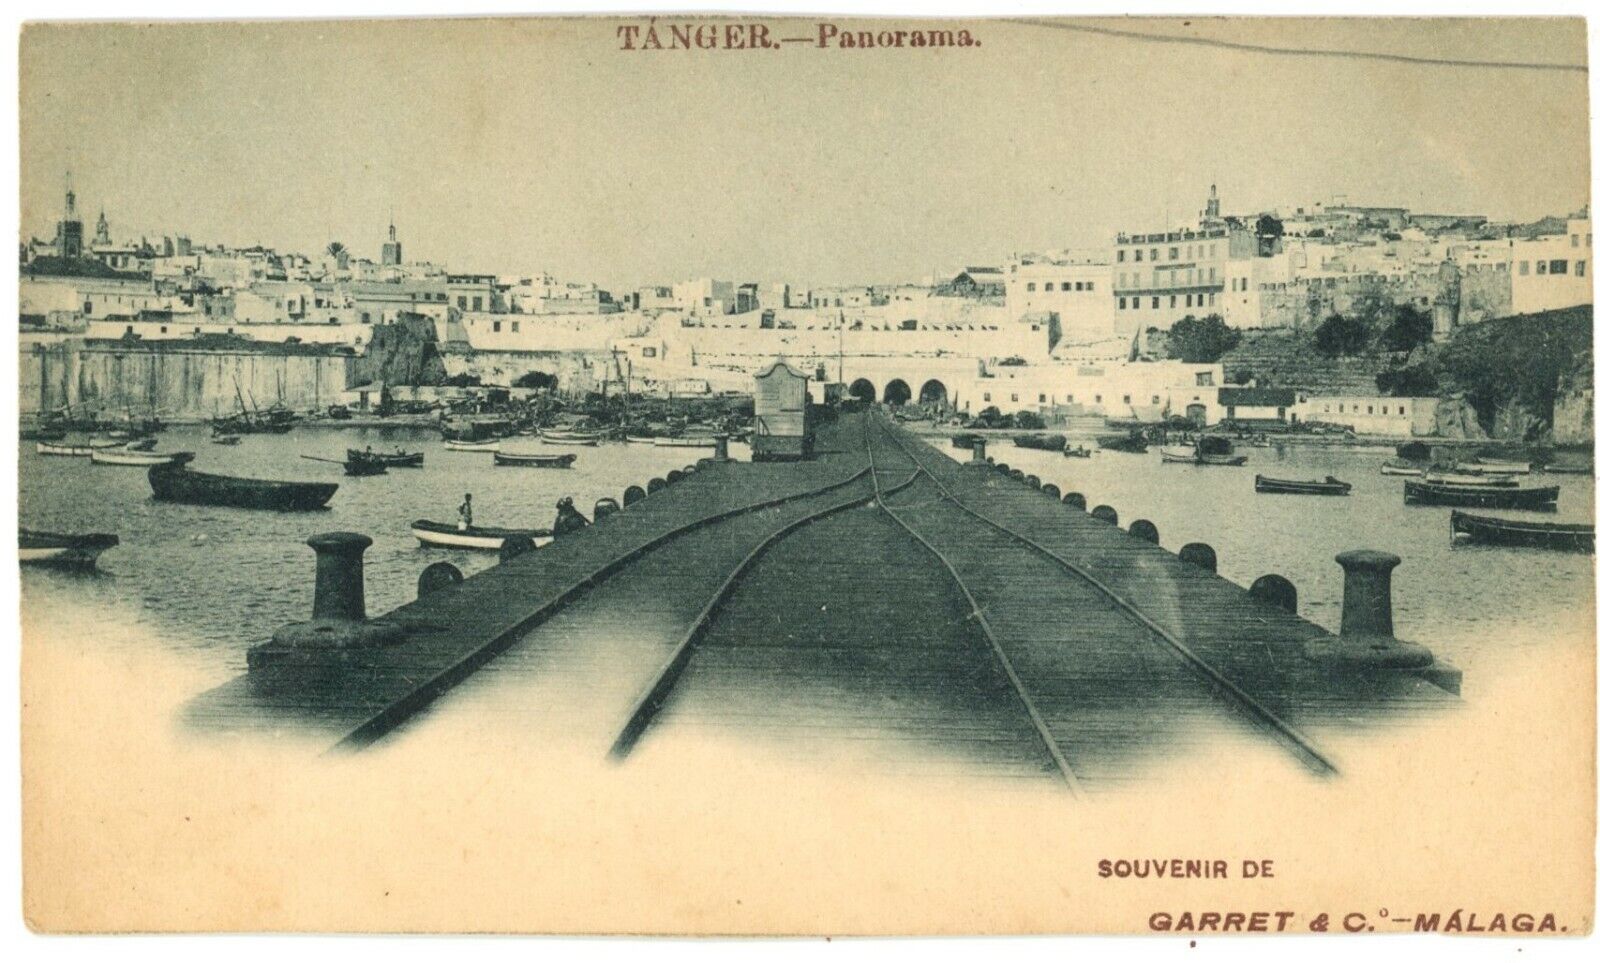 View Of Boats Docked In Port And Railway, Panorama Of Tangier, Morocco Postcard